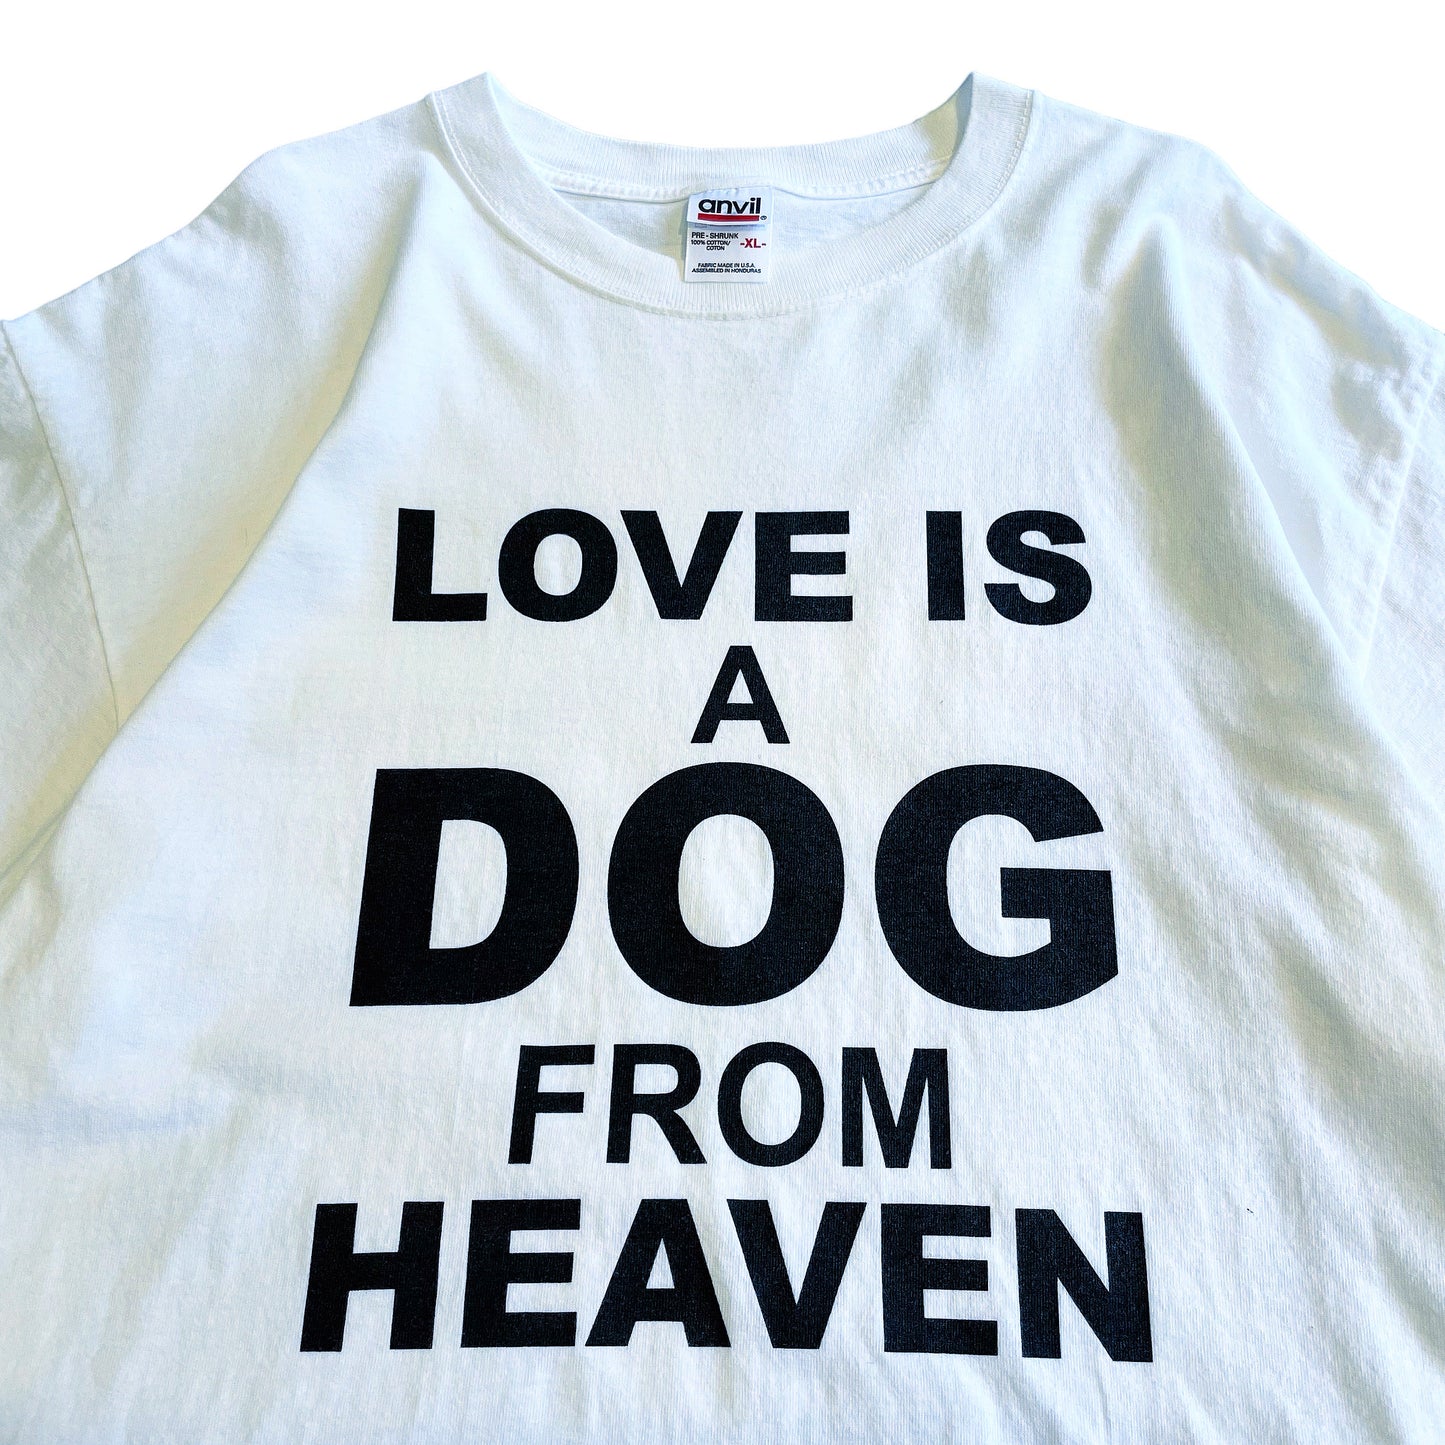 90s〜00s〜 anvil T-shirt LOVE A DOG FROM HEVEN XL アンビル tシャツ ヴィンテージ